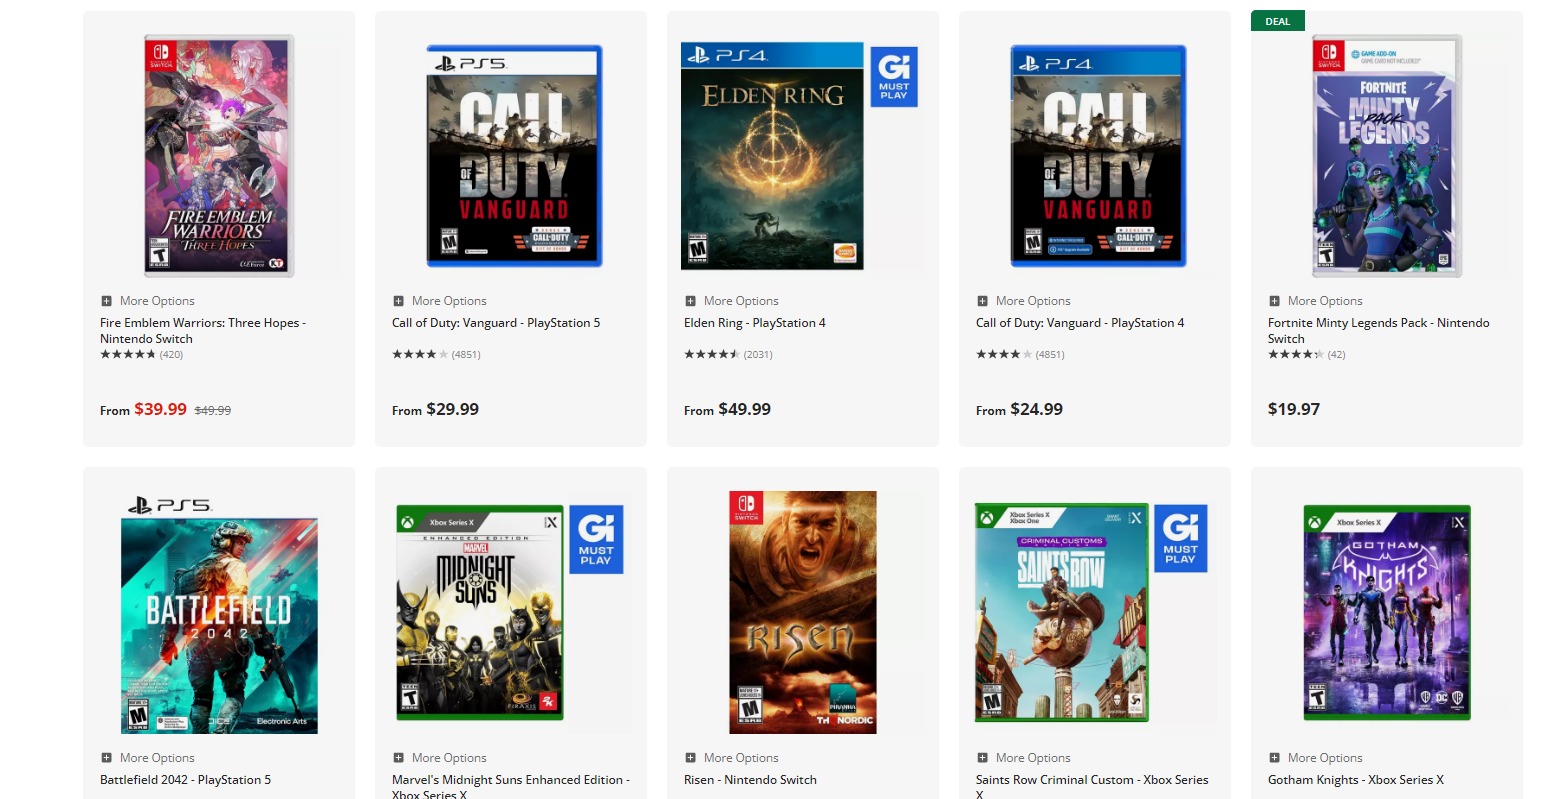 GameStop's new "buy one get one free" deal featuring a set of enticing games.